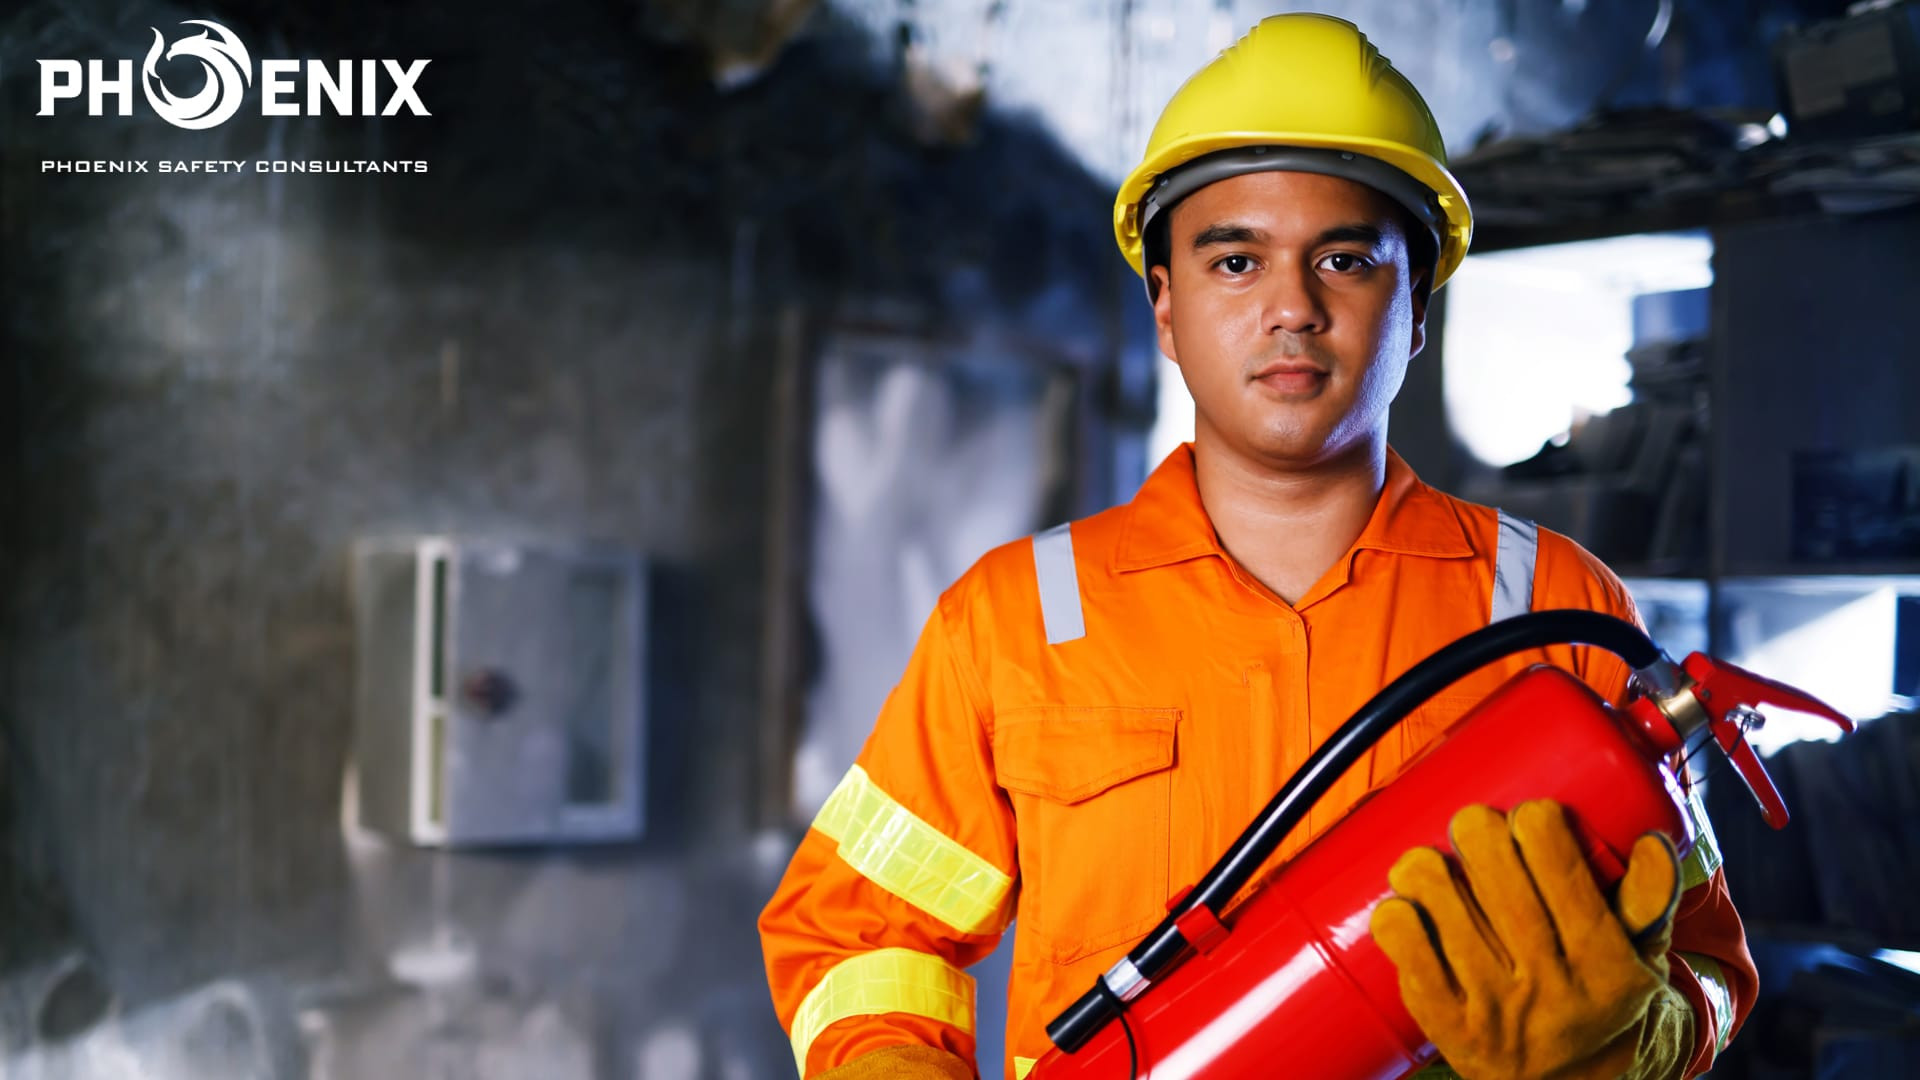 Fire Safety and Prevention Plans in Construction